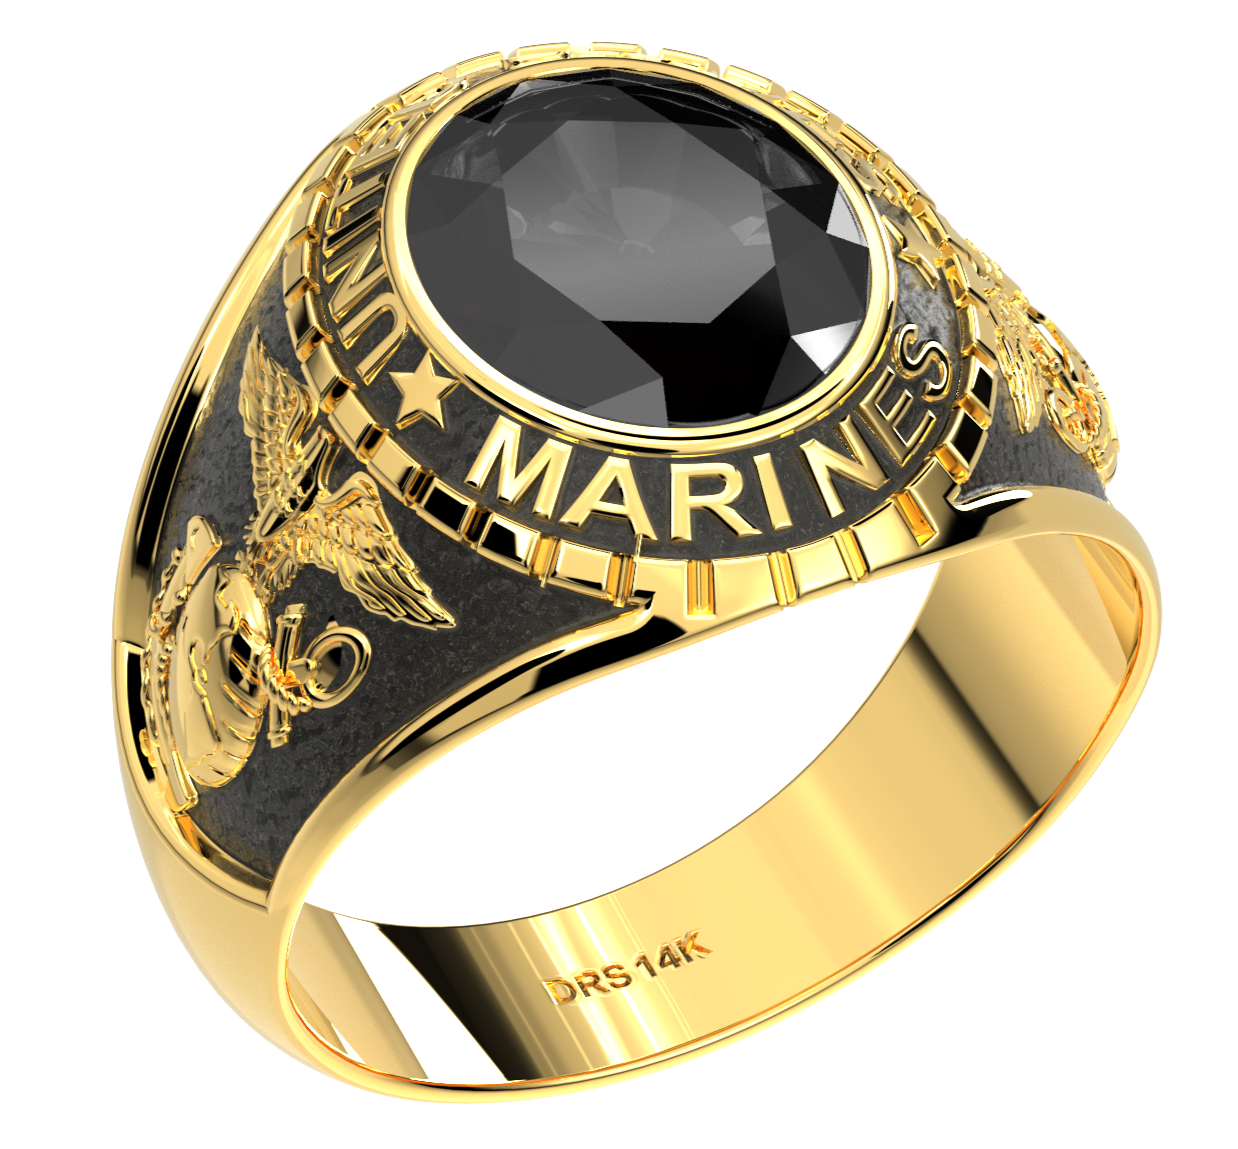 Customizable Size Men's 10k or 14k Yellow or White Gold United States Marine Corps Military Solid Back Ring